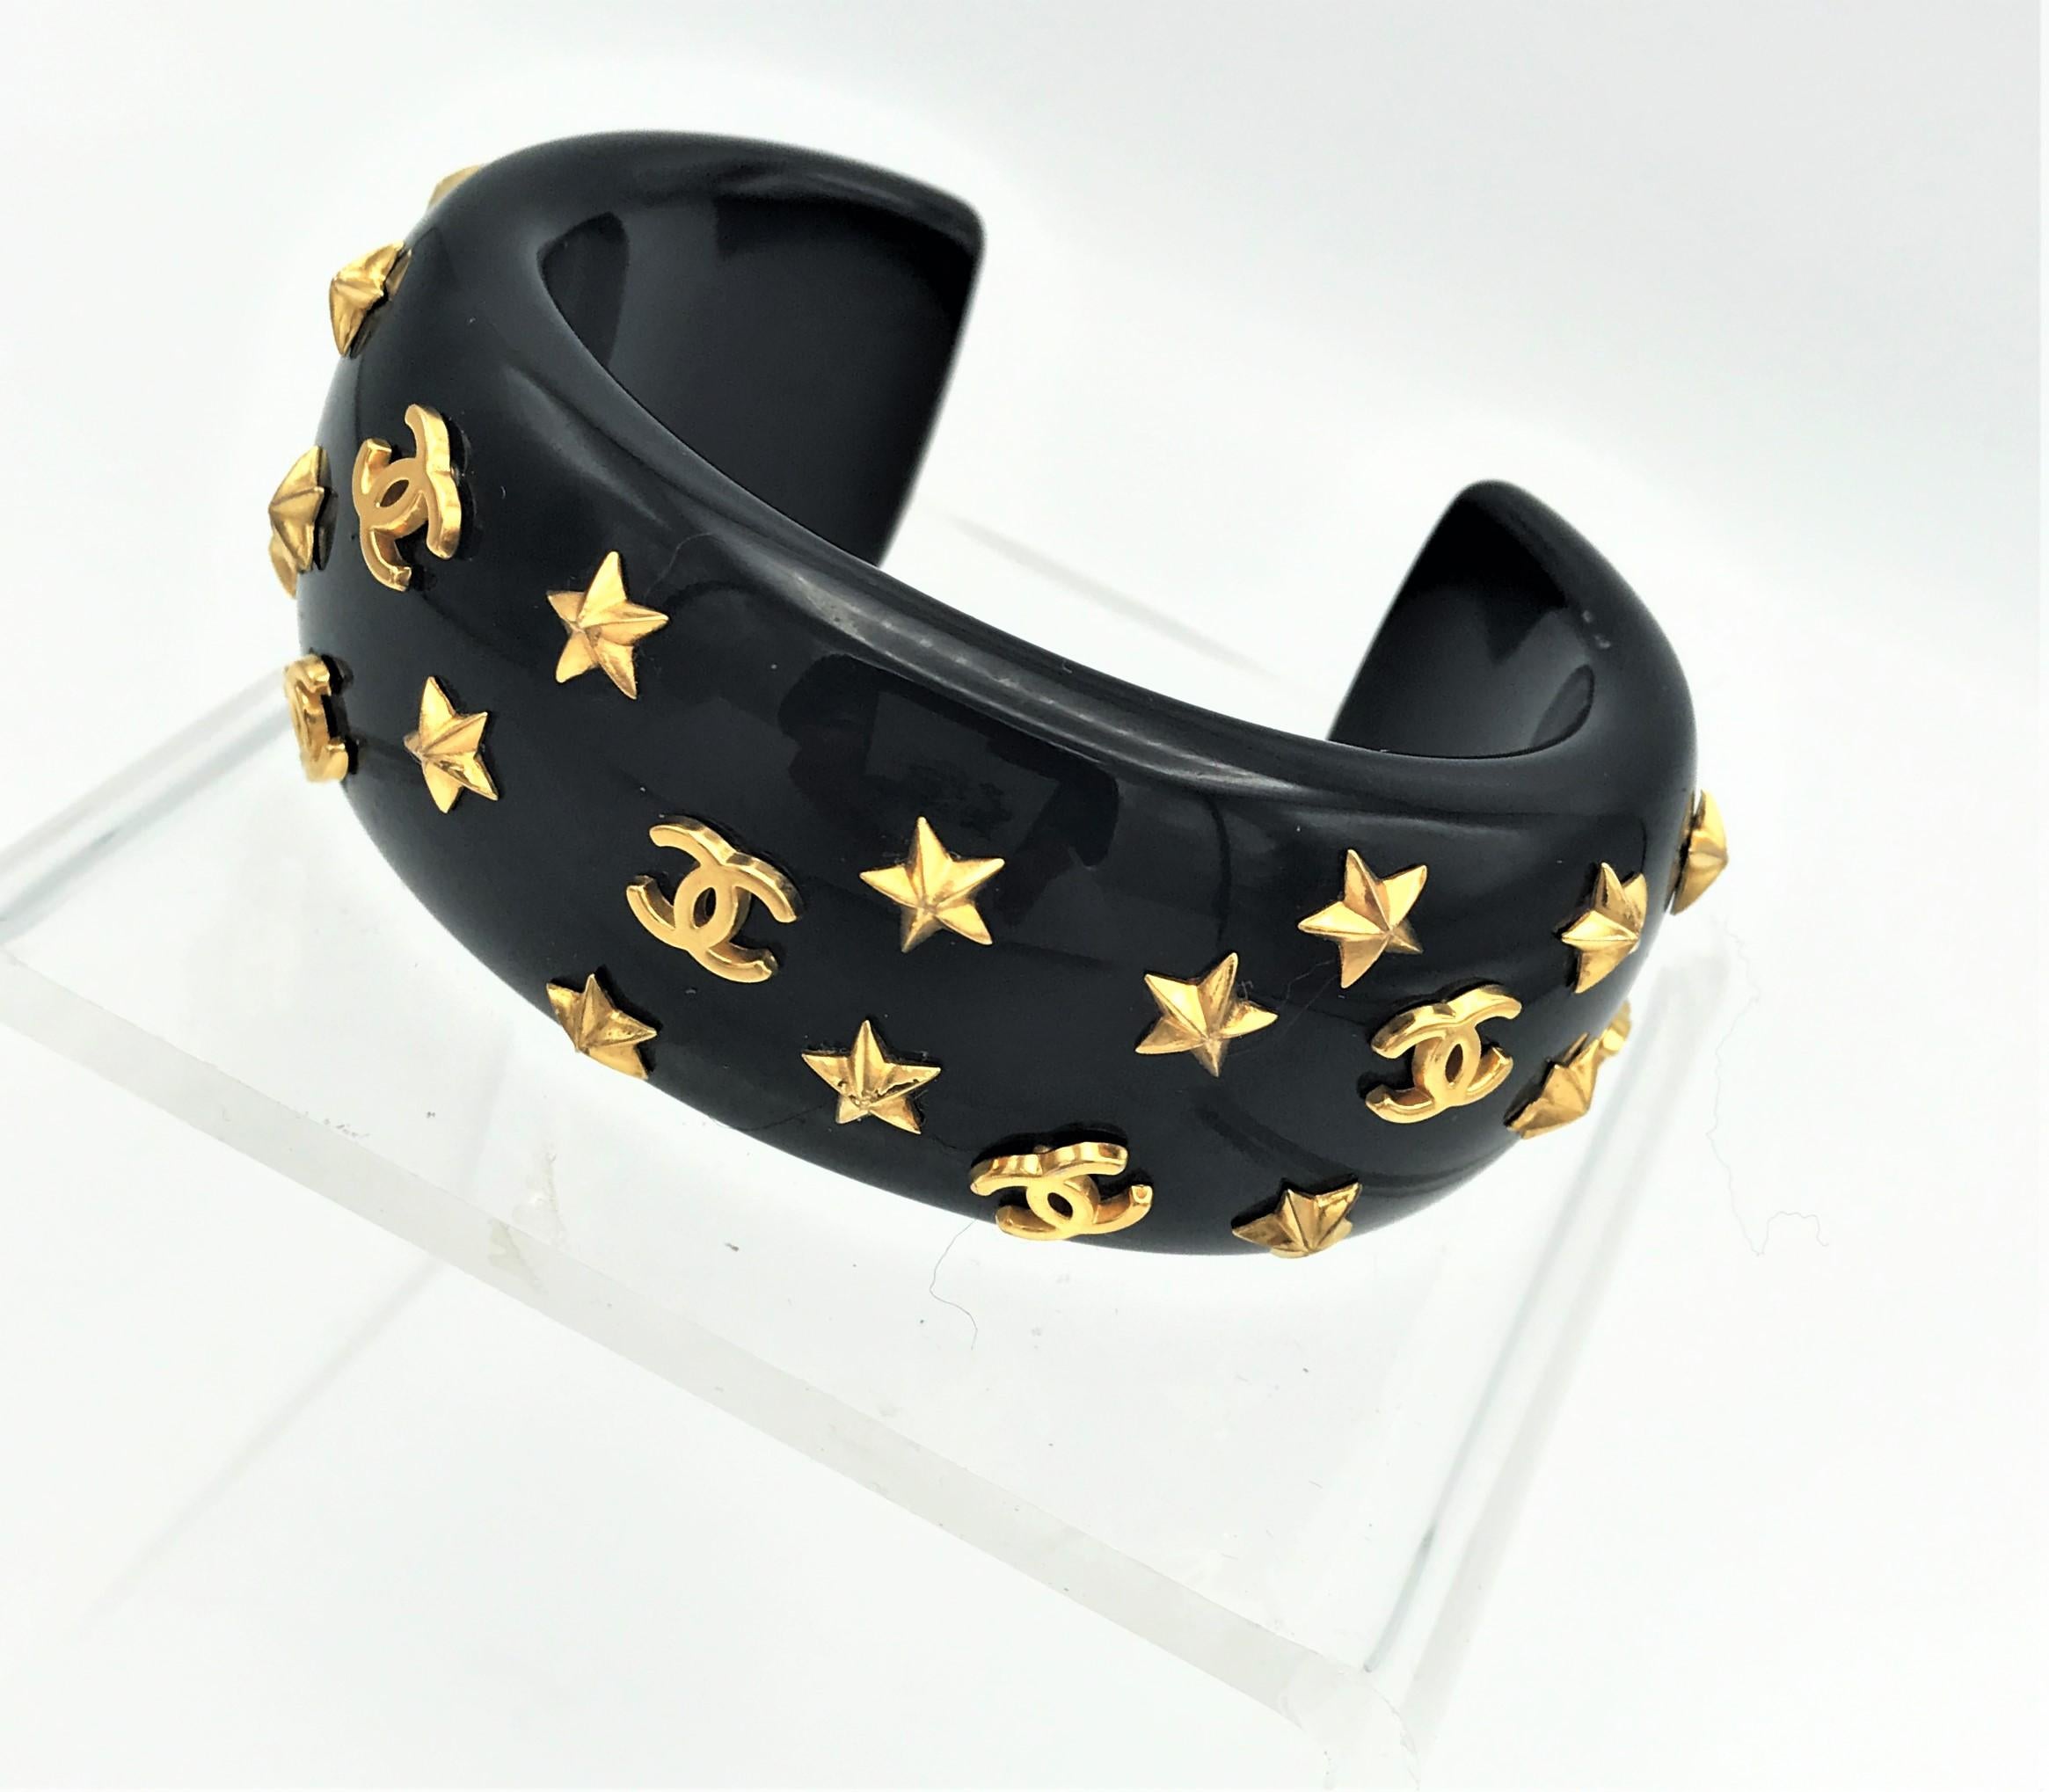 Chanel open bracelet, molded black acrylic signed 95 CC P with gold stars and CC 1